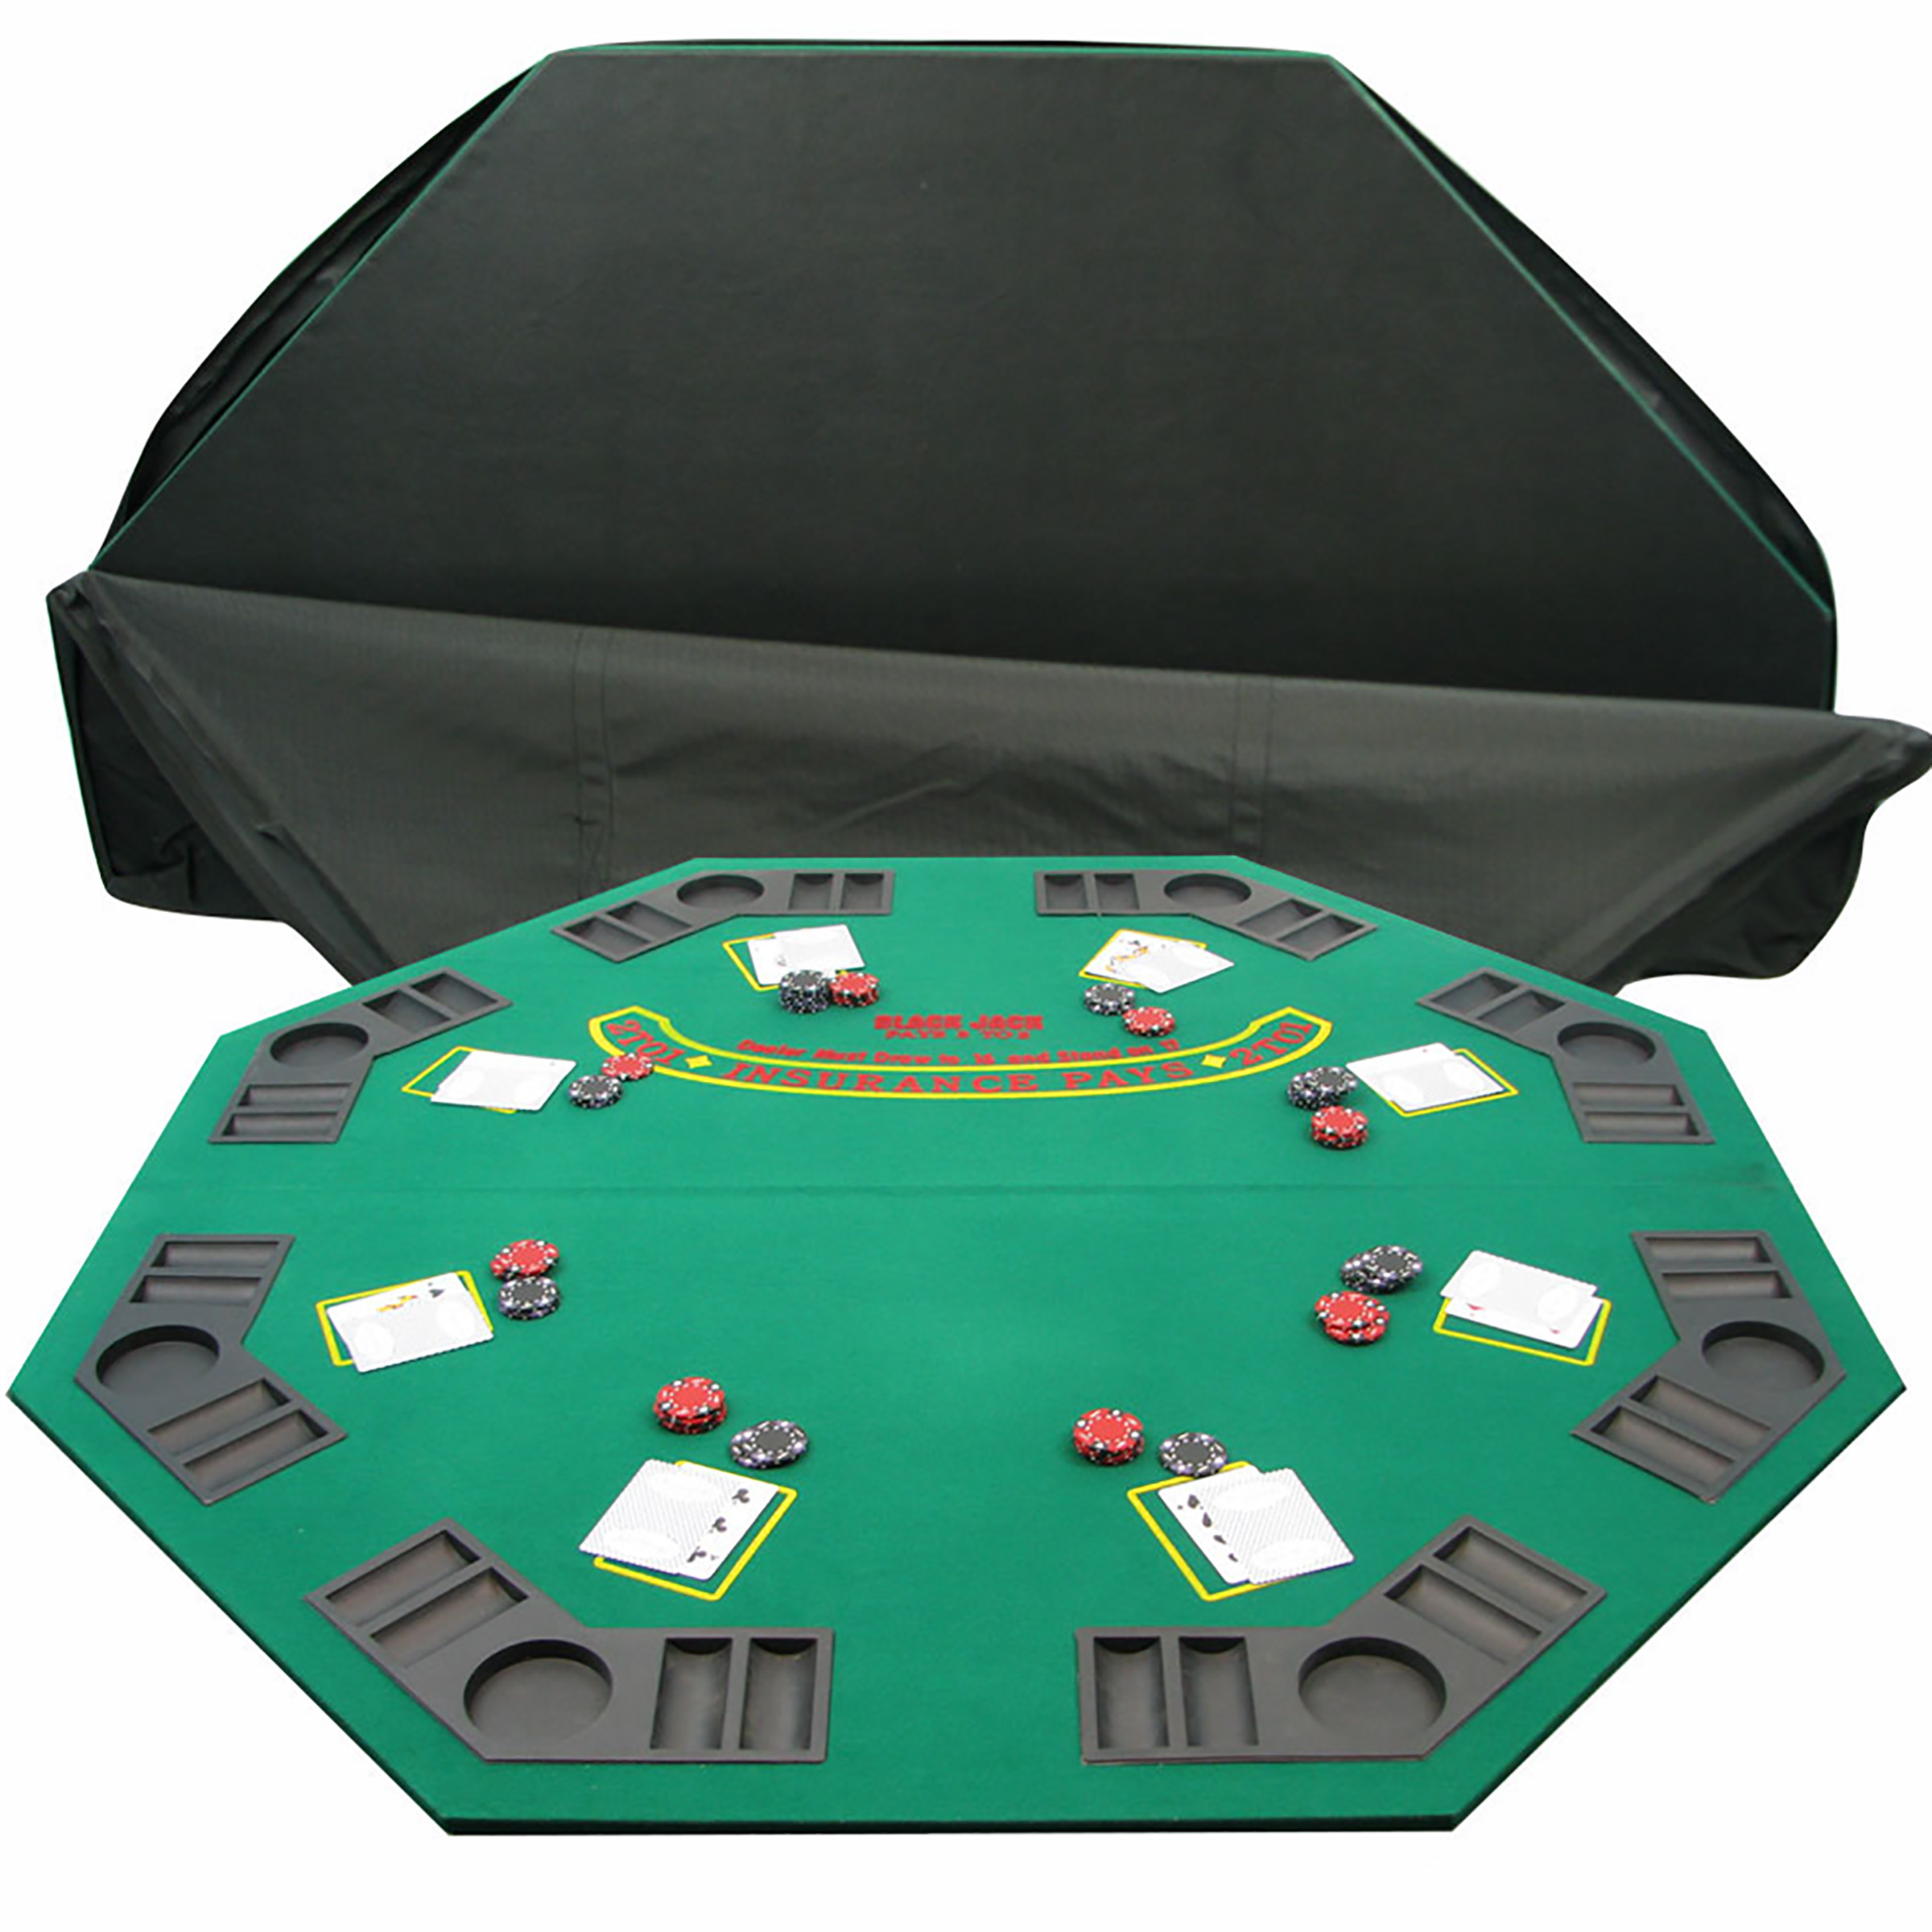 Trademark Poker 48in Wood Folding Poker Table Top with Space for 8 Players - image 1 of 2